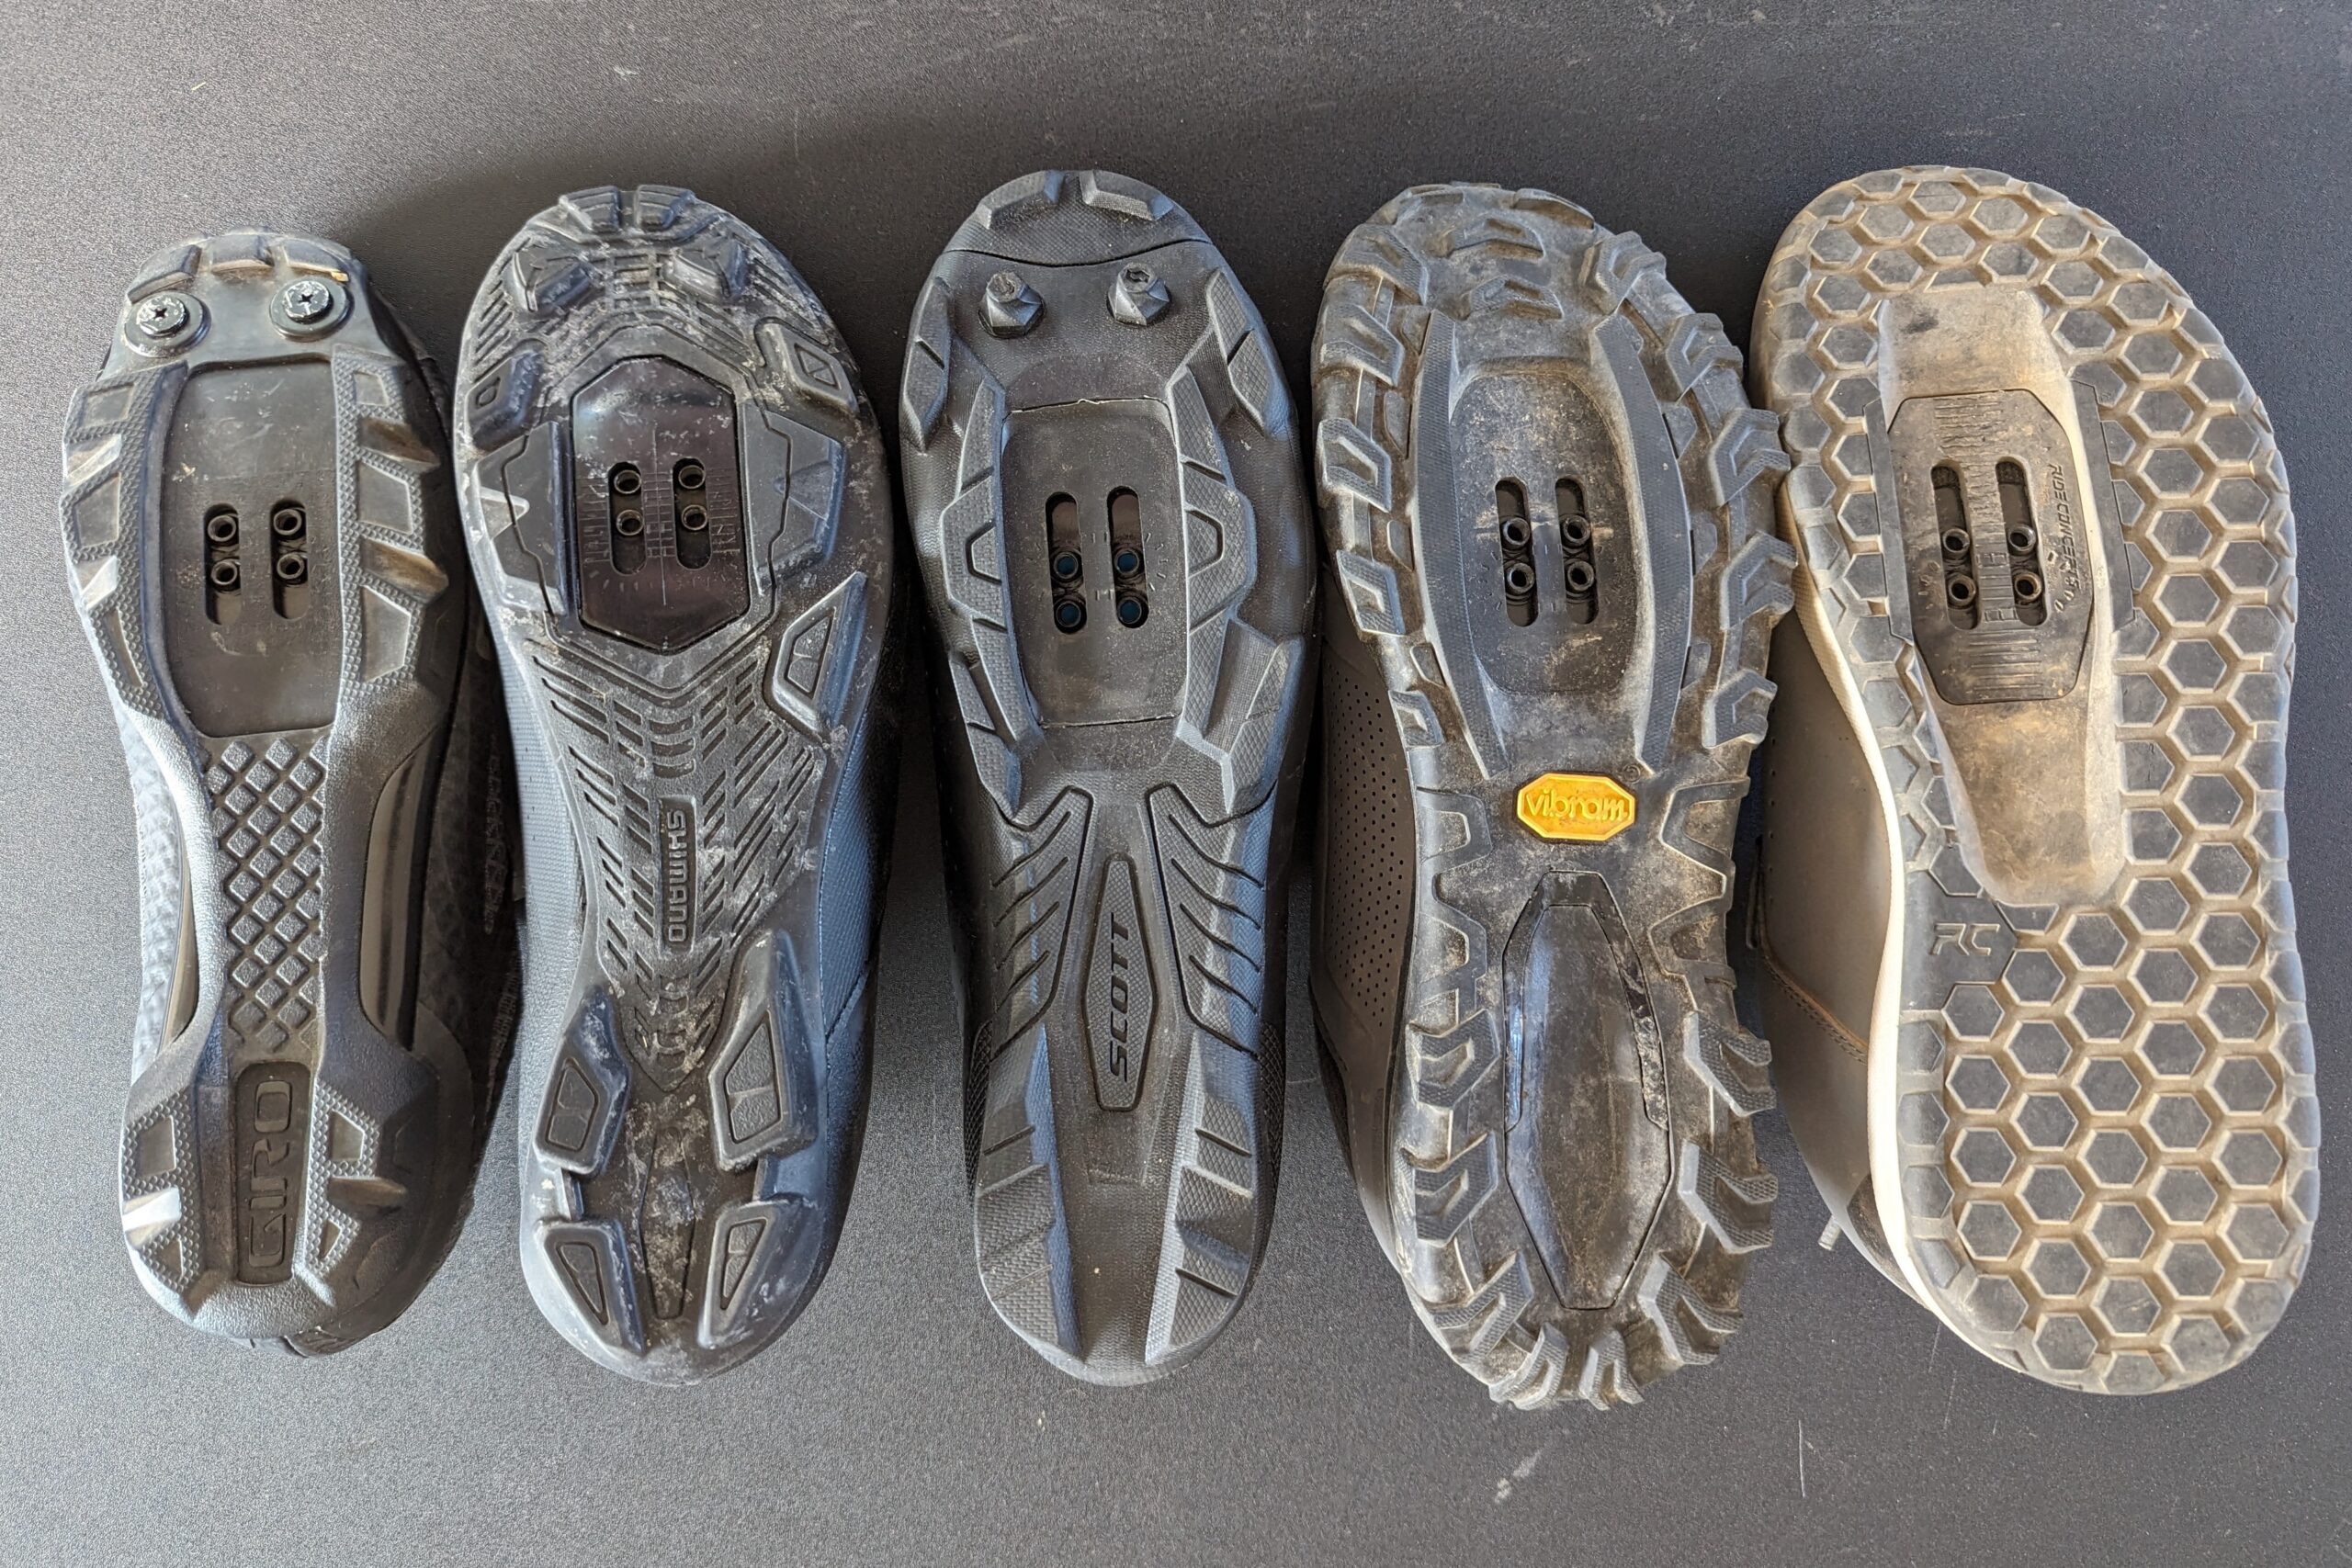 Comparison shot of the soles of the clipless women's mountain bike shoe models we tested